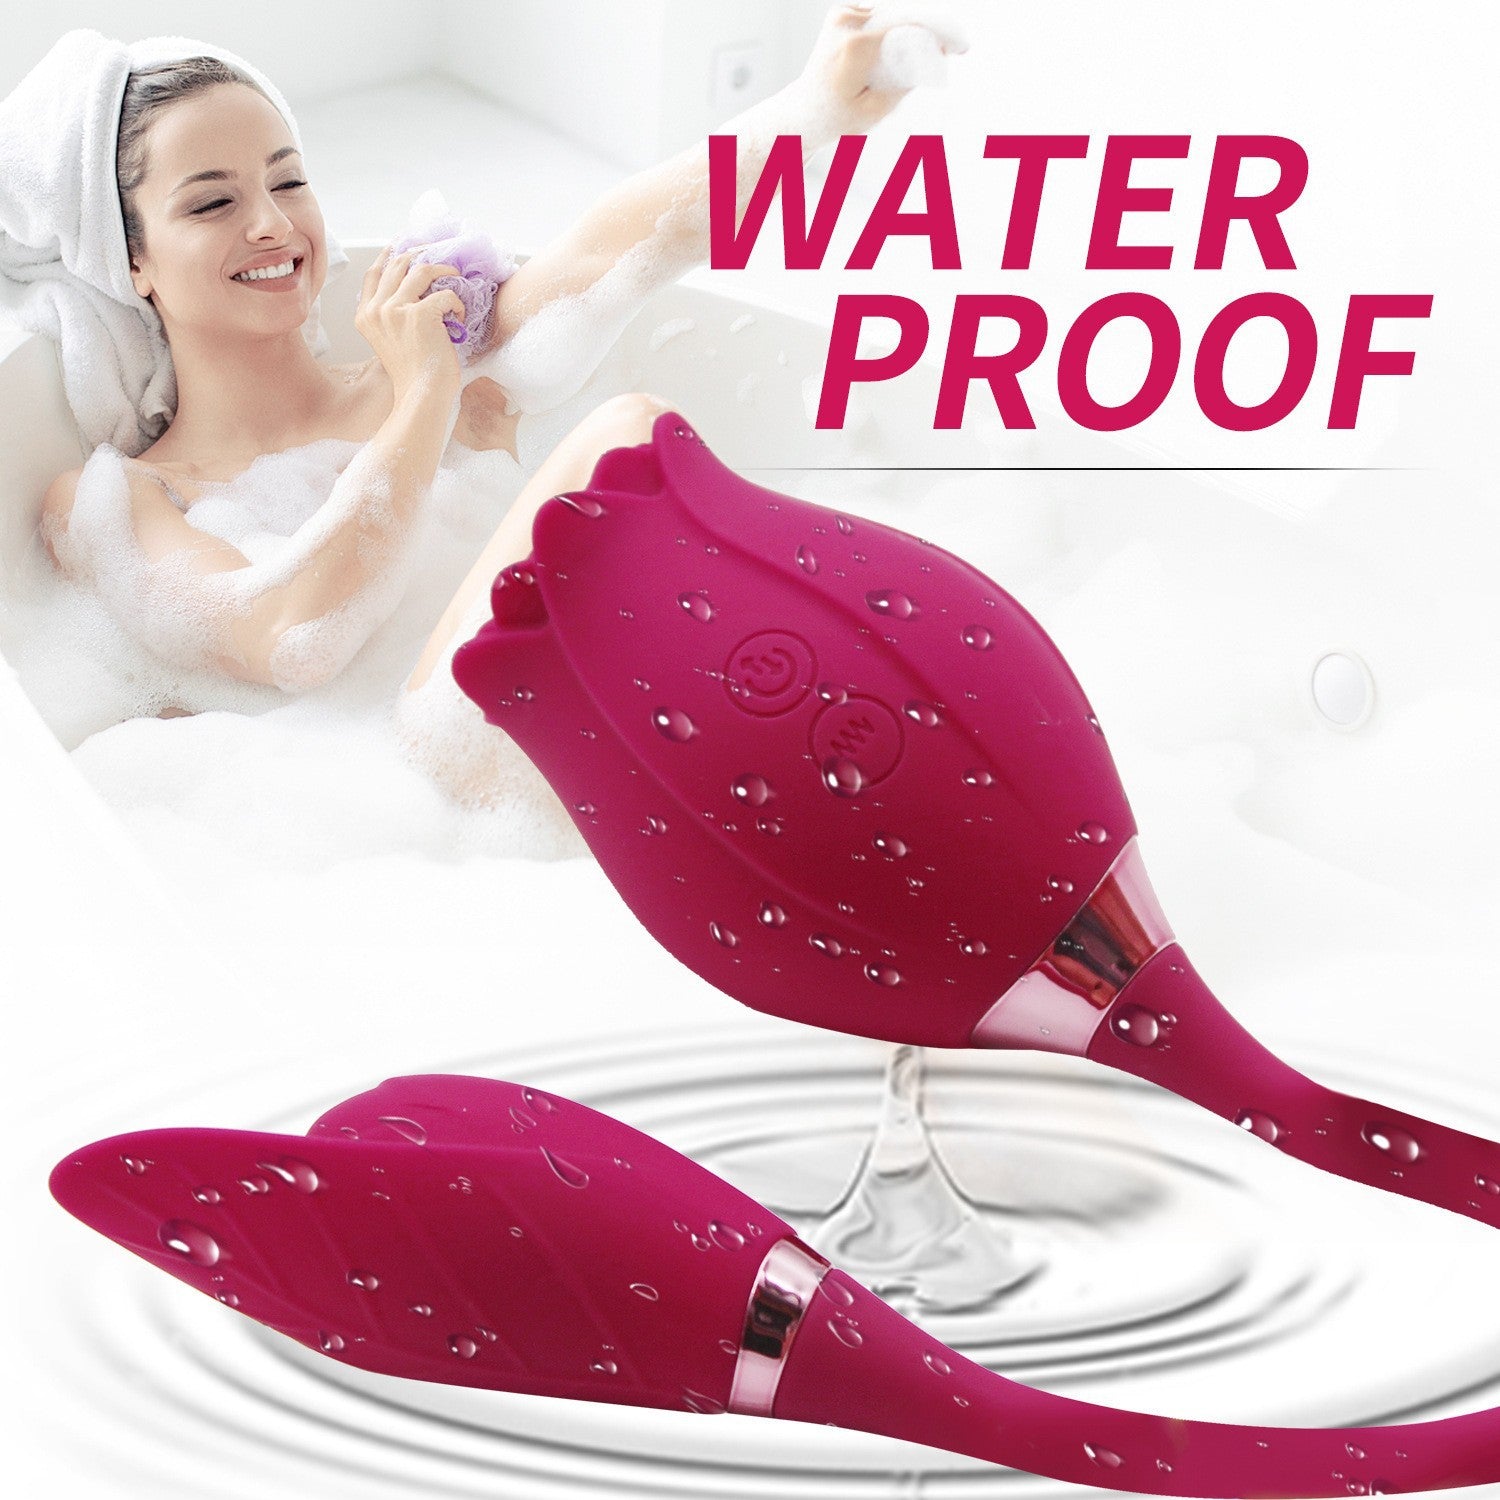 Rose Silicone water proof clit stimulator